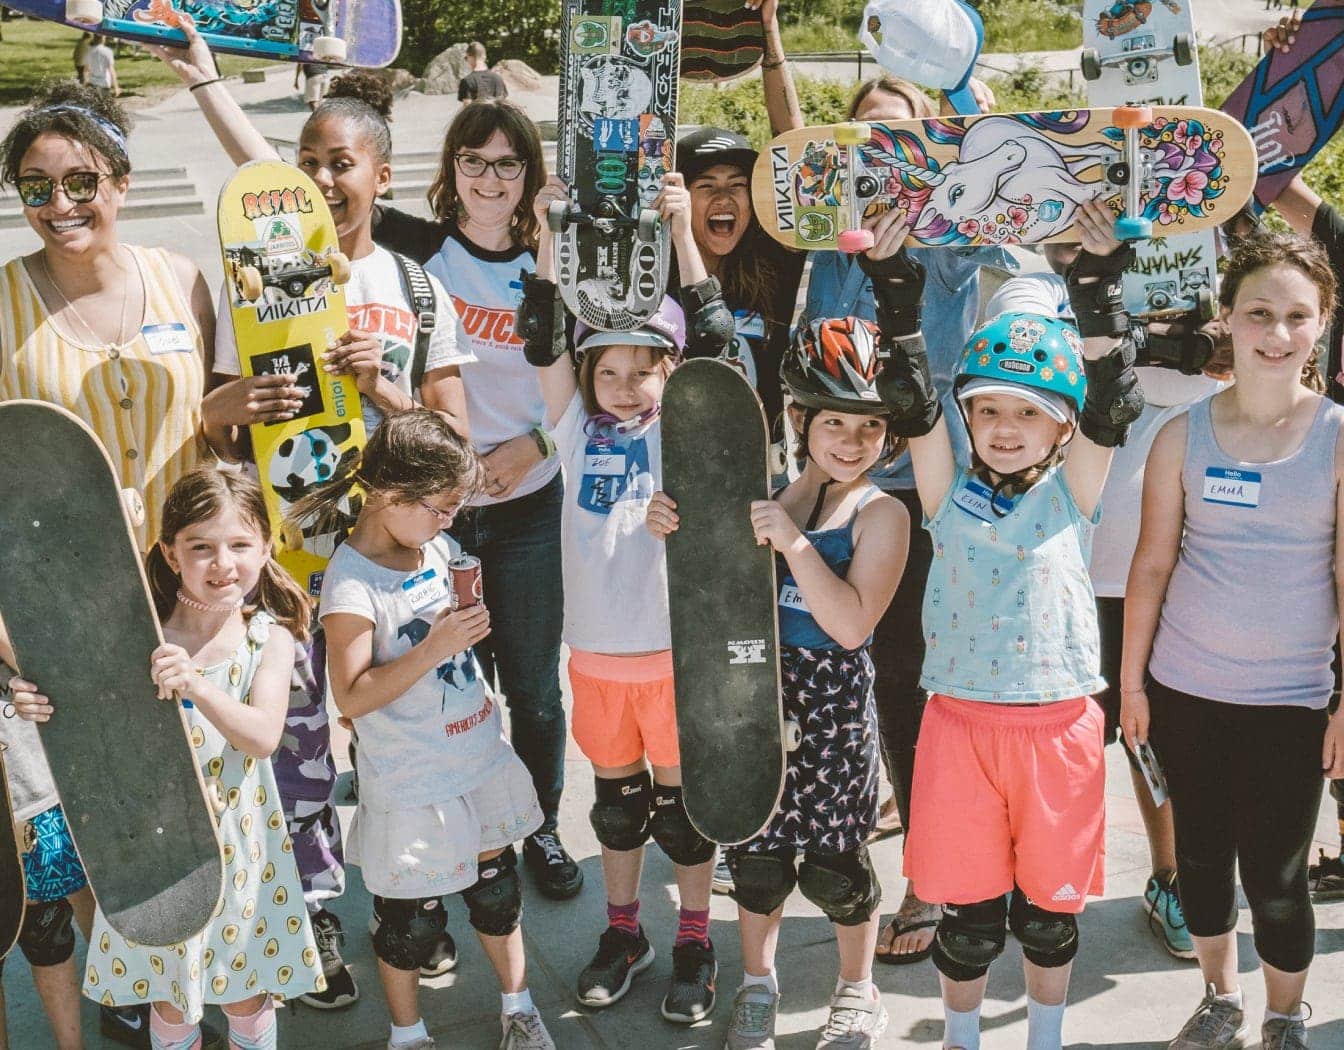 A group of kids of diverse ethnicities smiling at the camera, holding up their skateboards. Some of them are wearing helmets and knee and elbow pads.